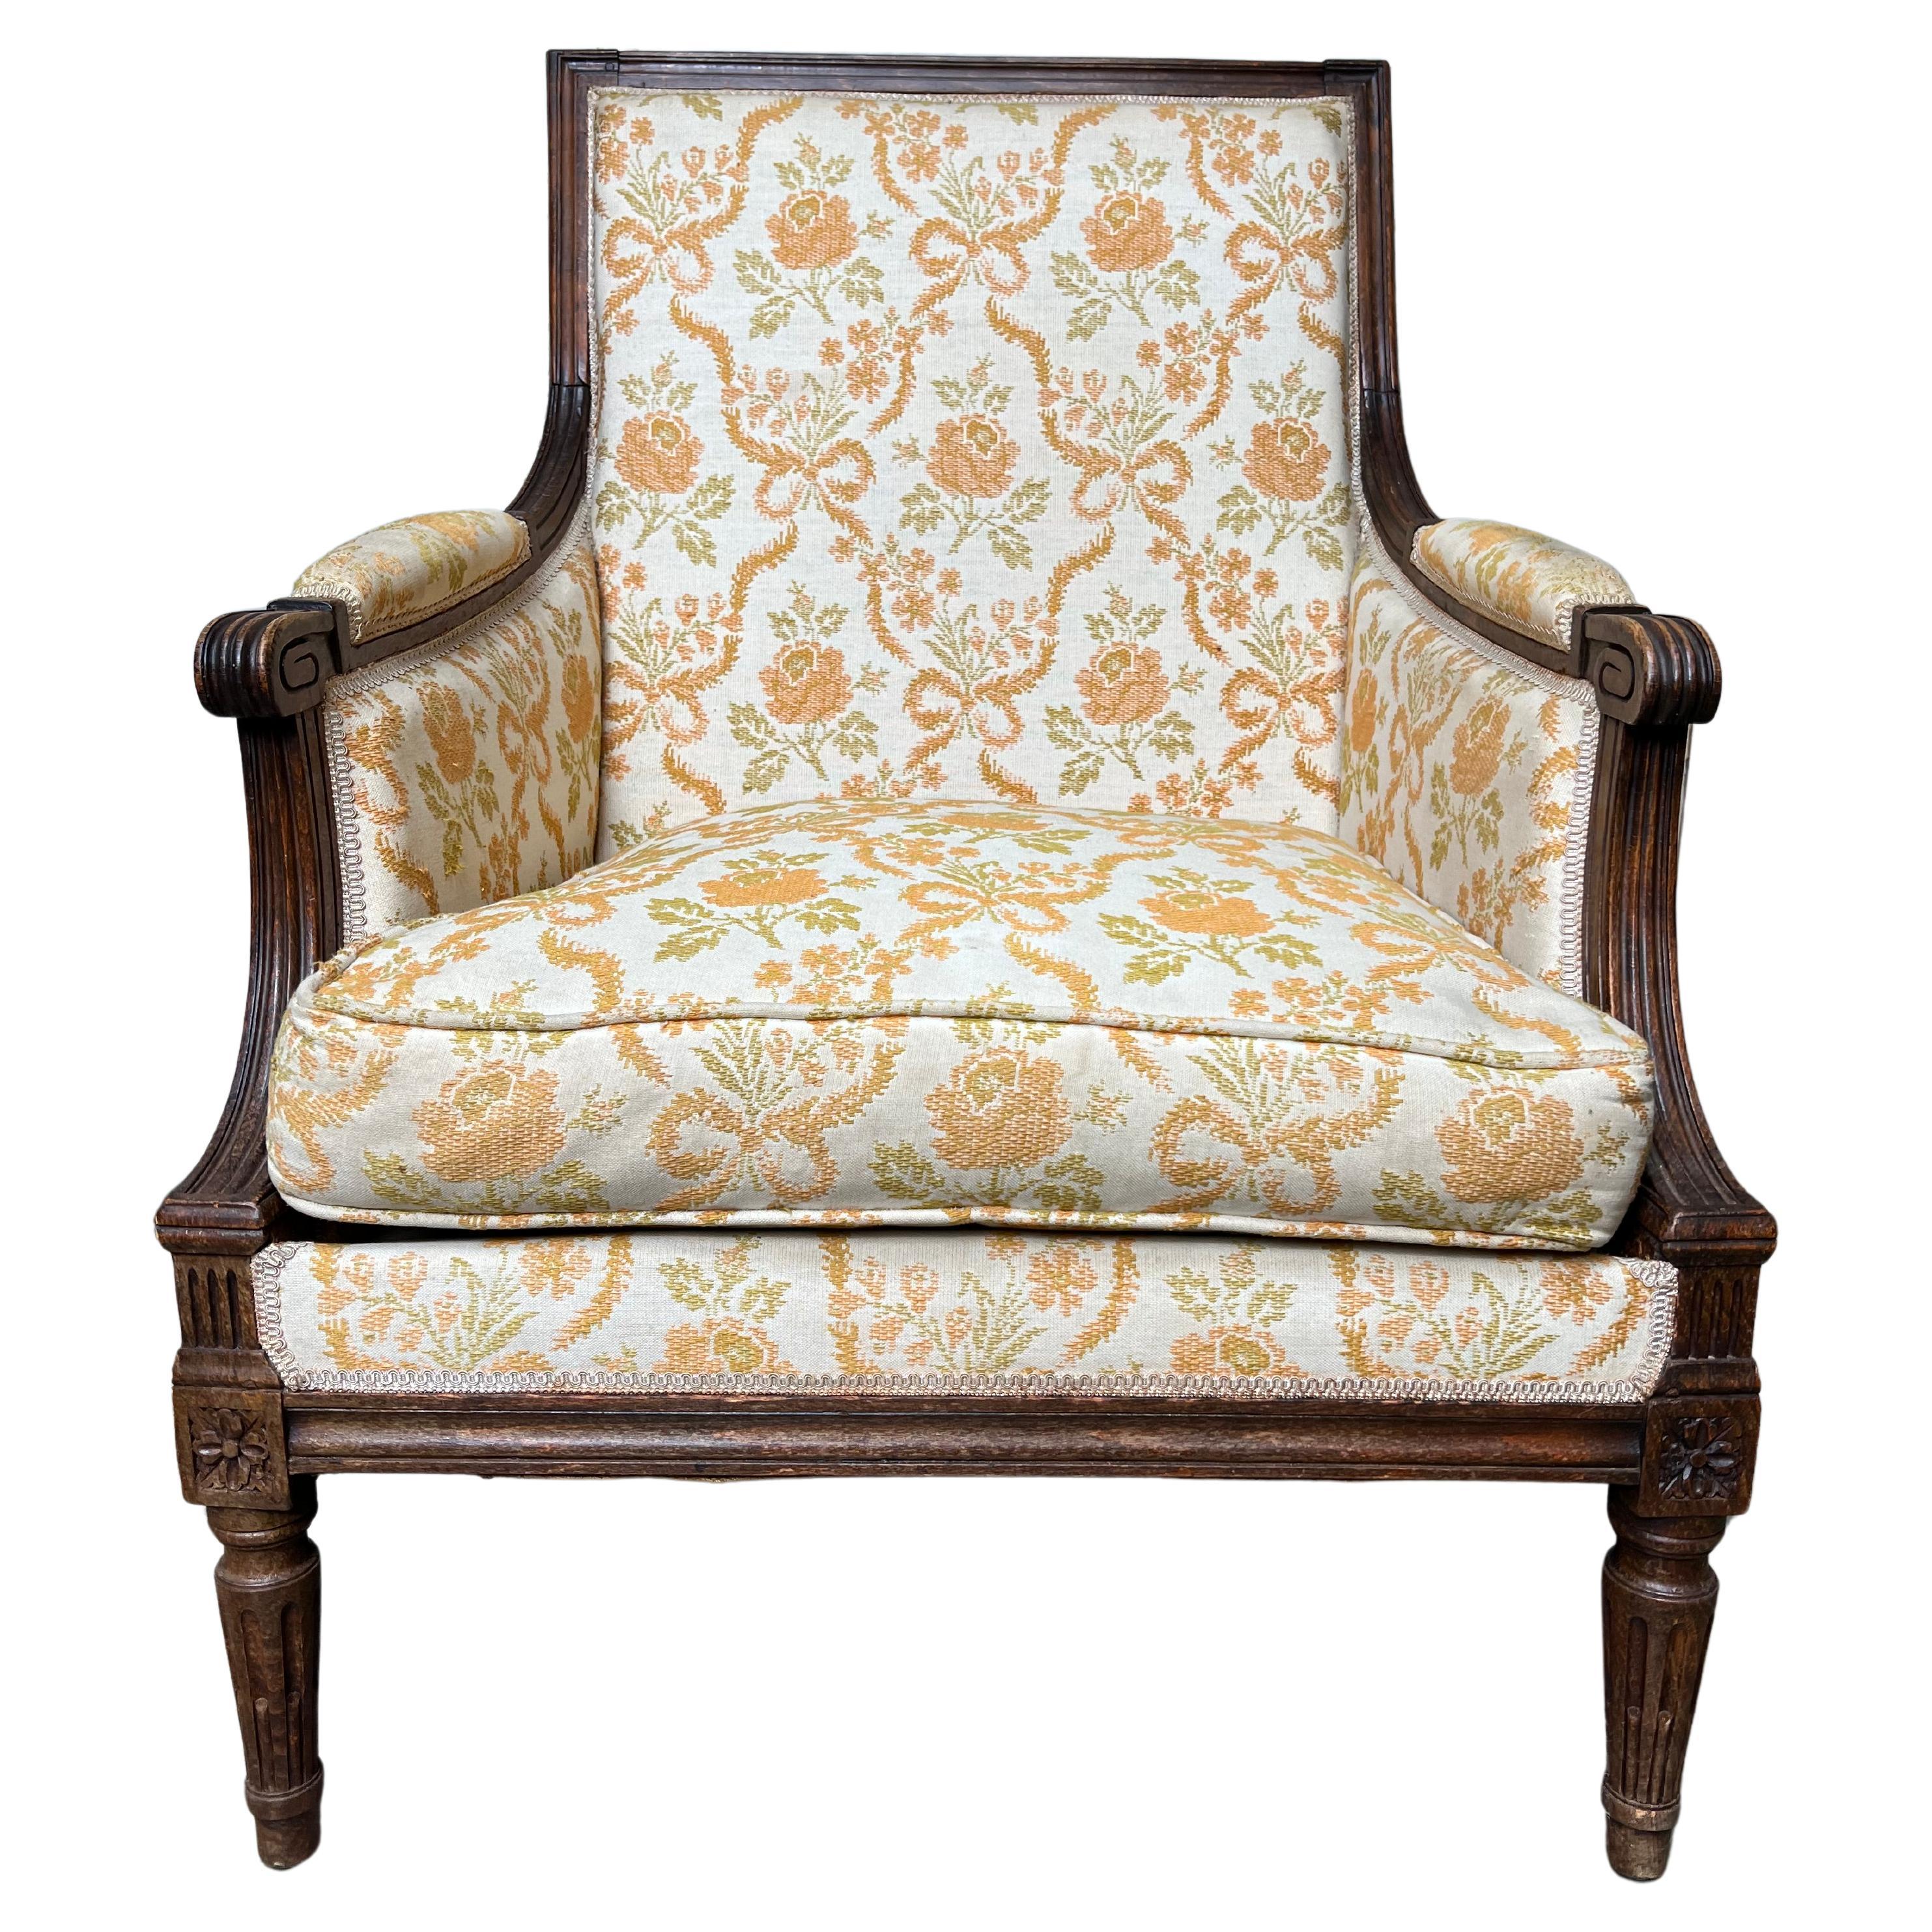 19th Century French Louis XVI Style Bergere Chair For Sale